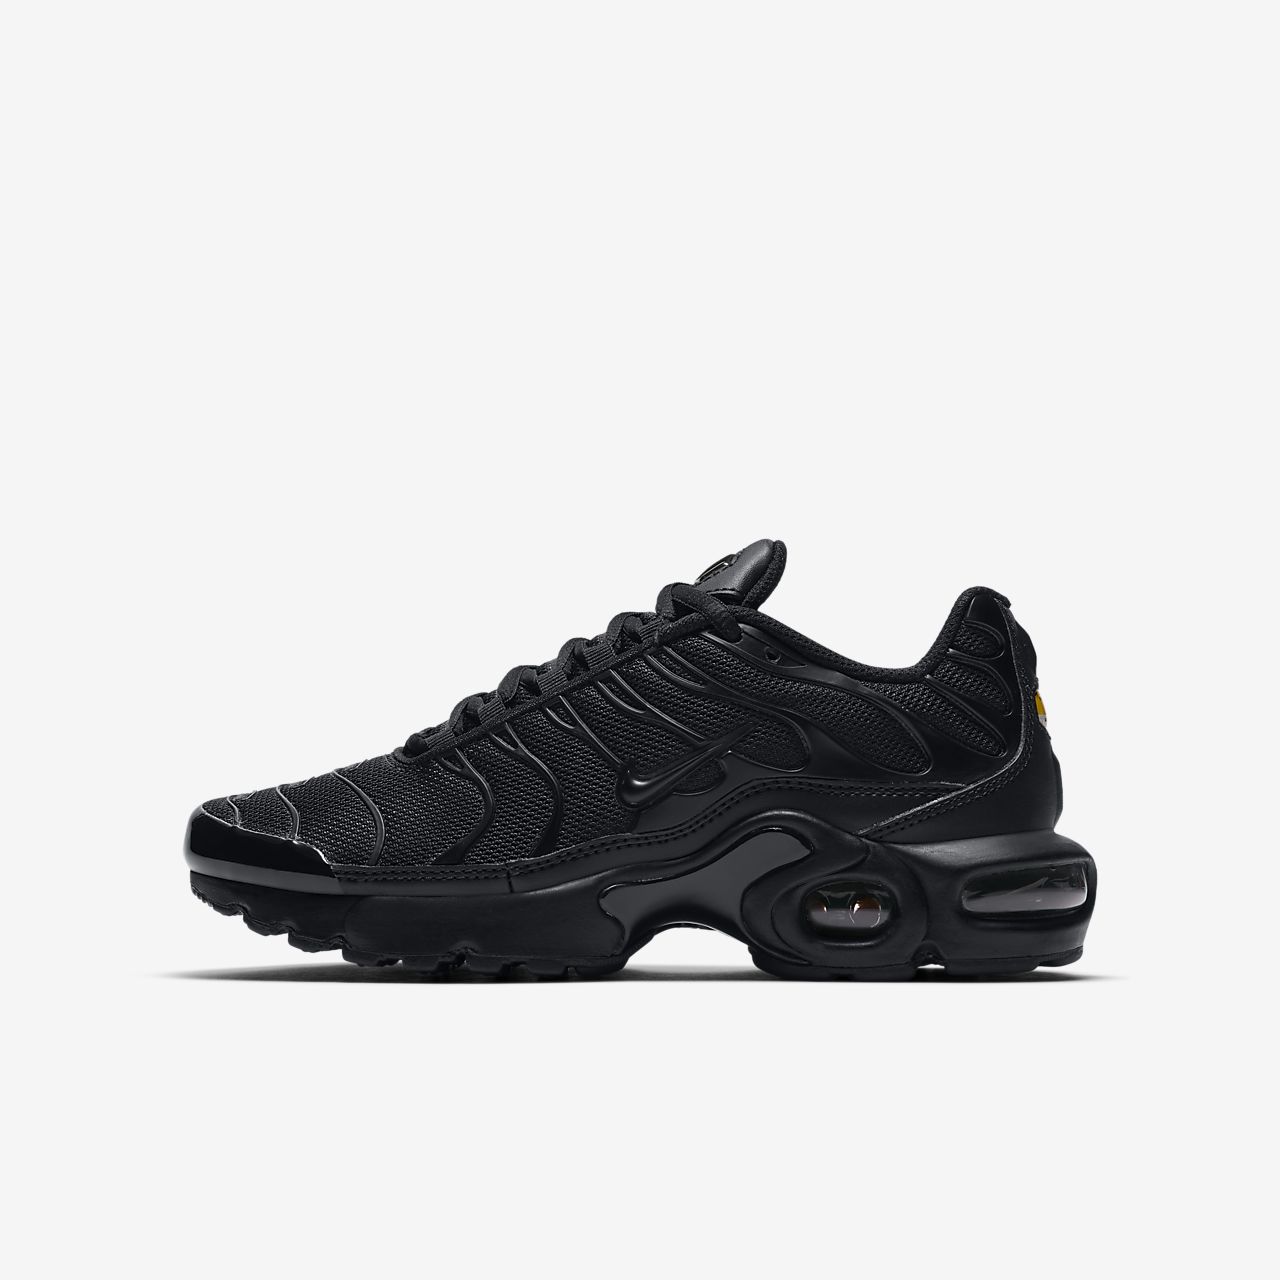 nike air max plus youth \u003e Up to 72% OFF 